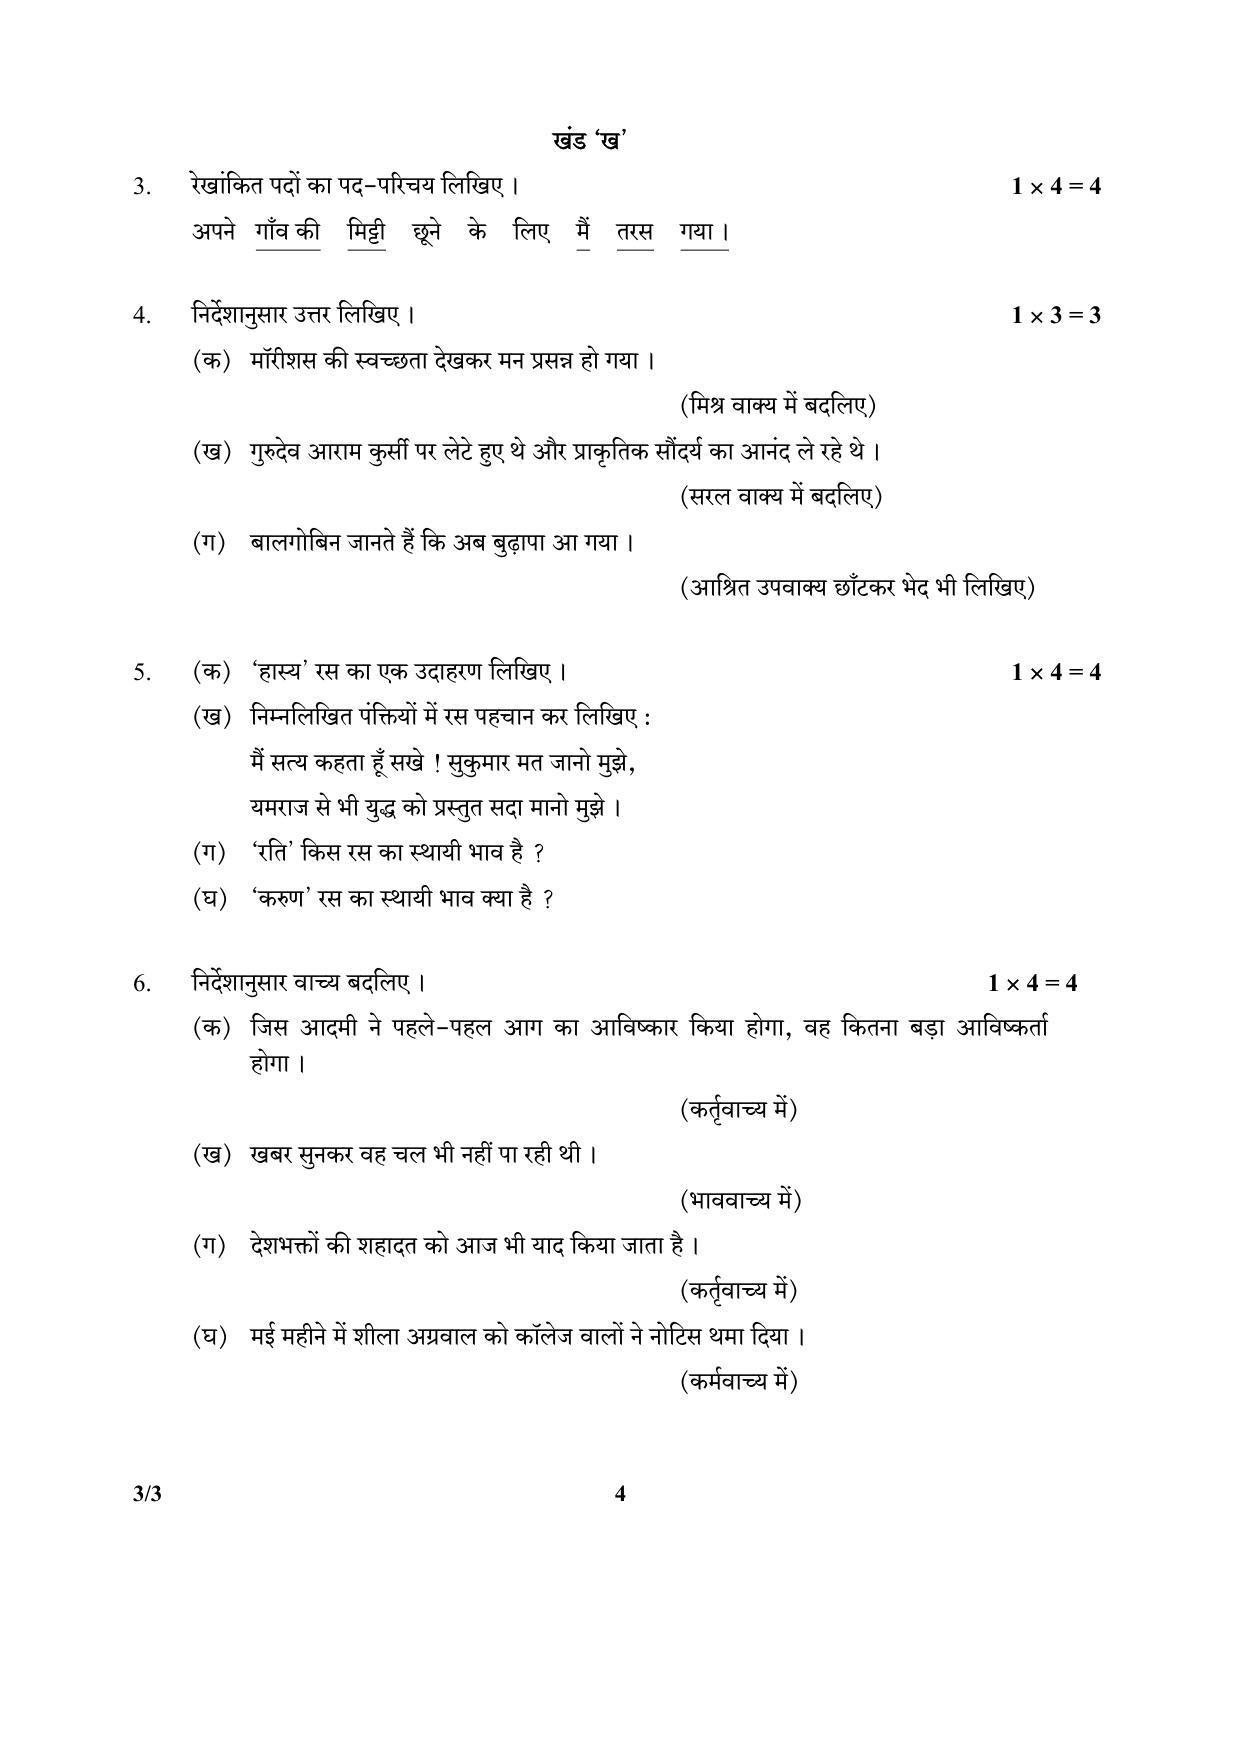 CBSE Class 10 3-3_Hindi SET-3 2018 Question Paper - Page 4